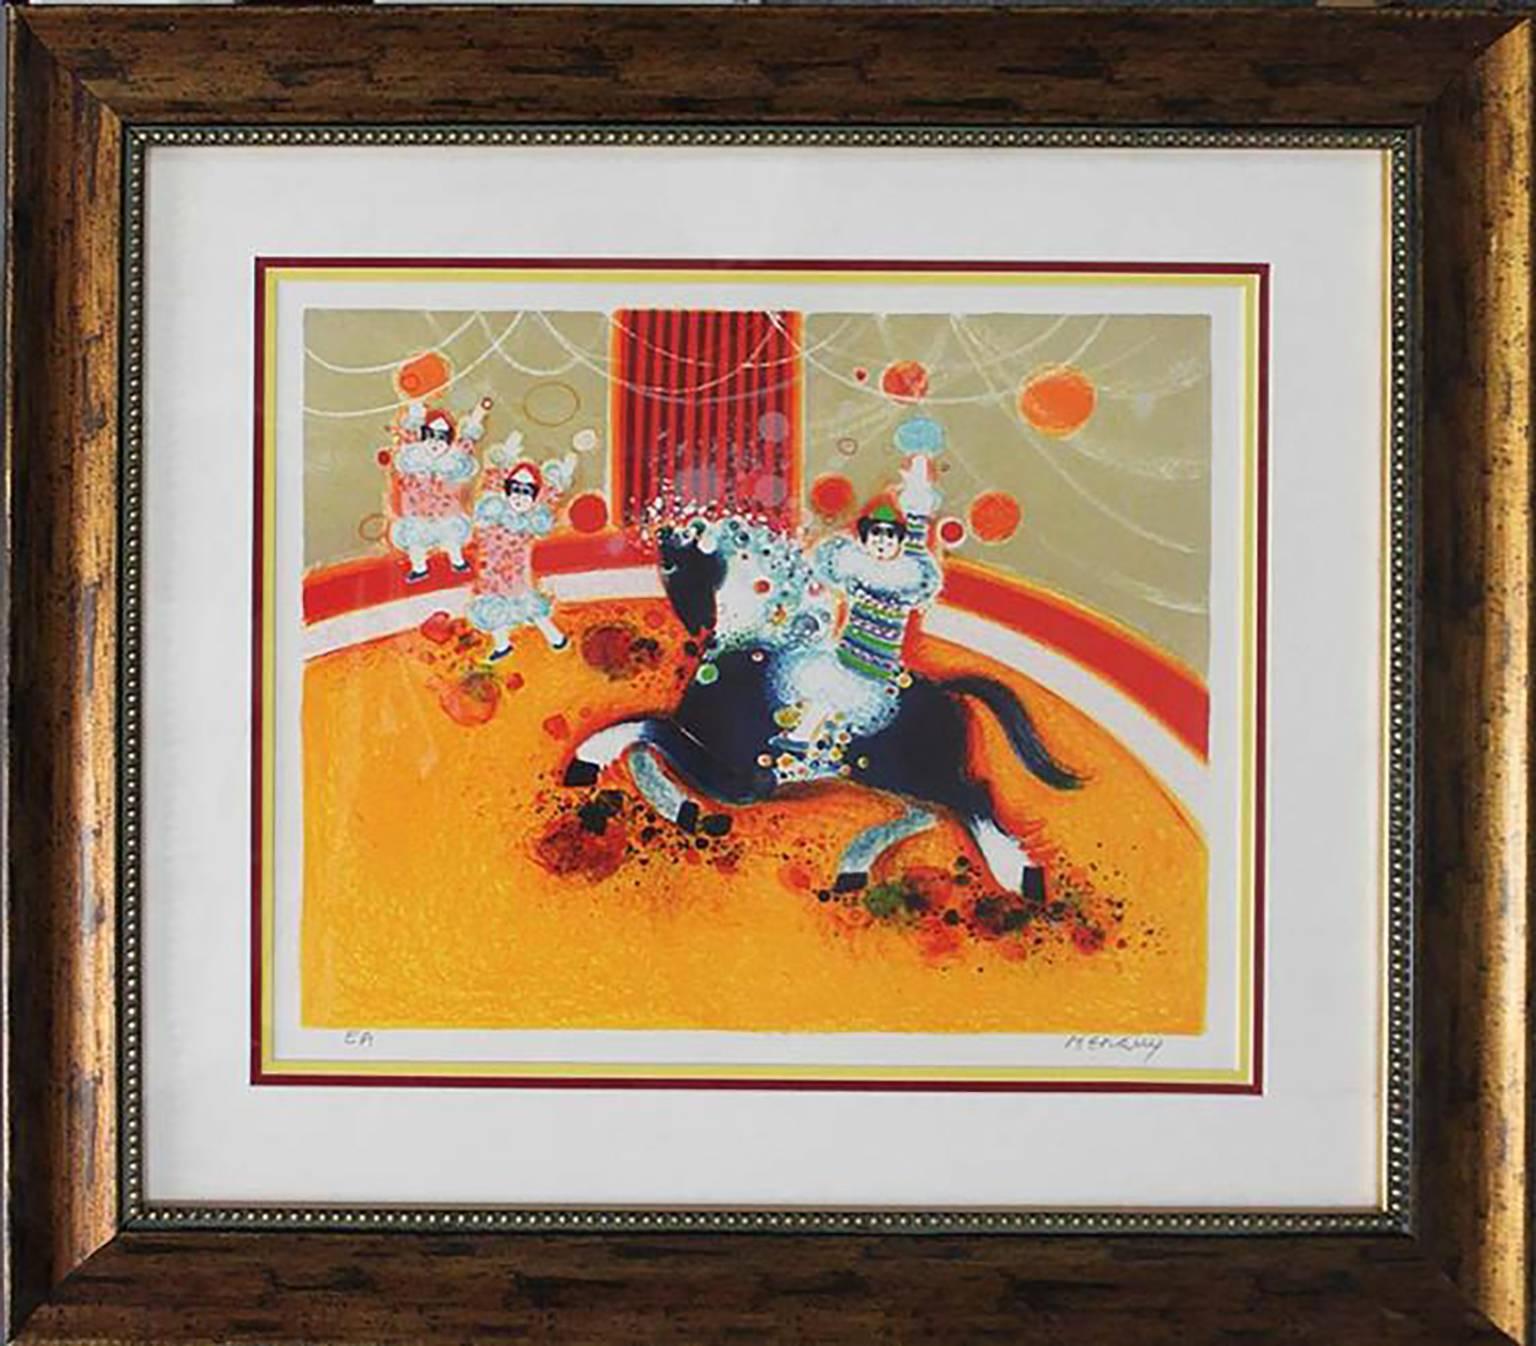 28″ x 31.5″  Frederic Menguy  At the Circus  21st Century  2004  Serigraph  Signed  Framed  Glass Covering

This Frederic Menguy limited edition serigraph is titled At The Circus. It is Hand signed and numbered by the artist with an edition size of